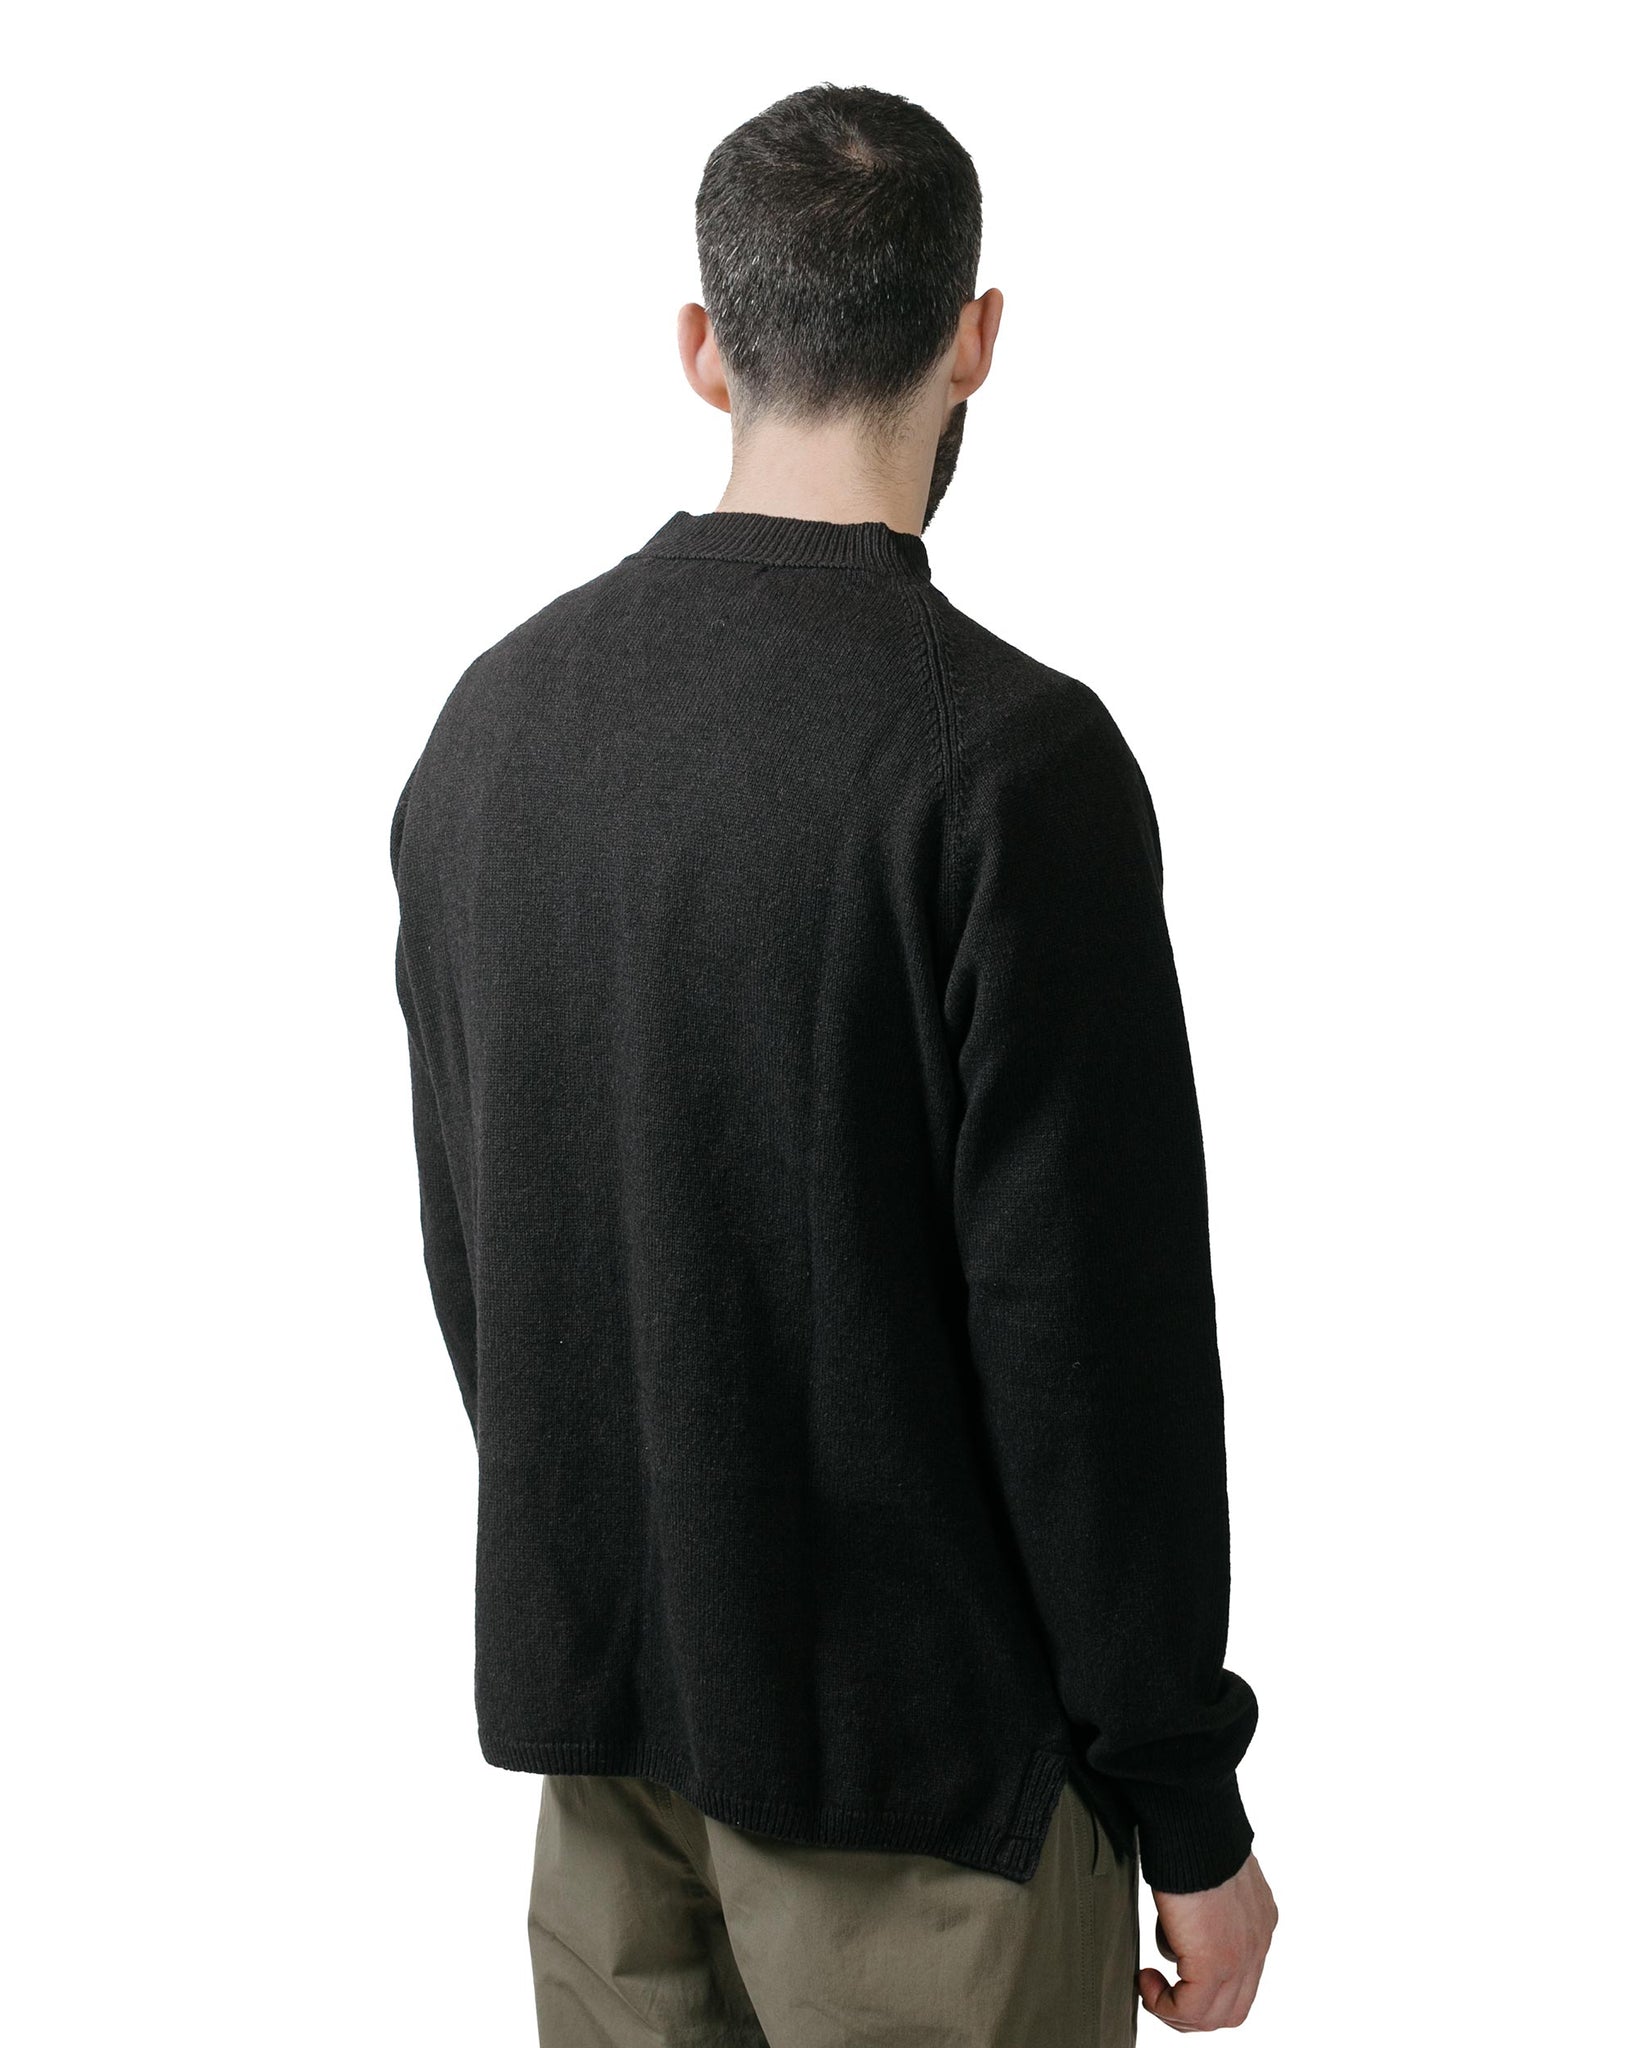 MHL Crew Neck Wool Cotton Carbon model back